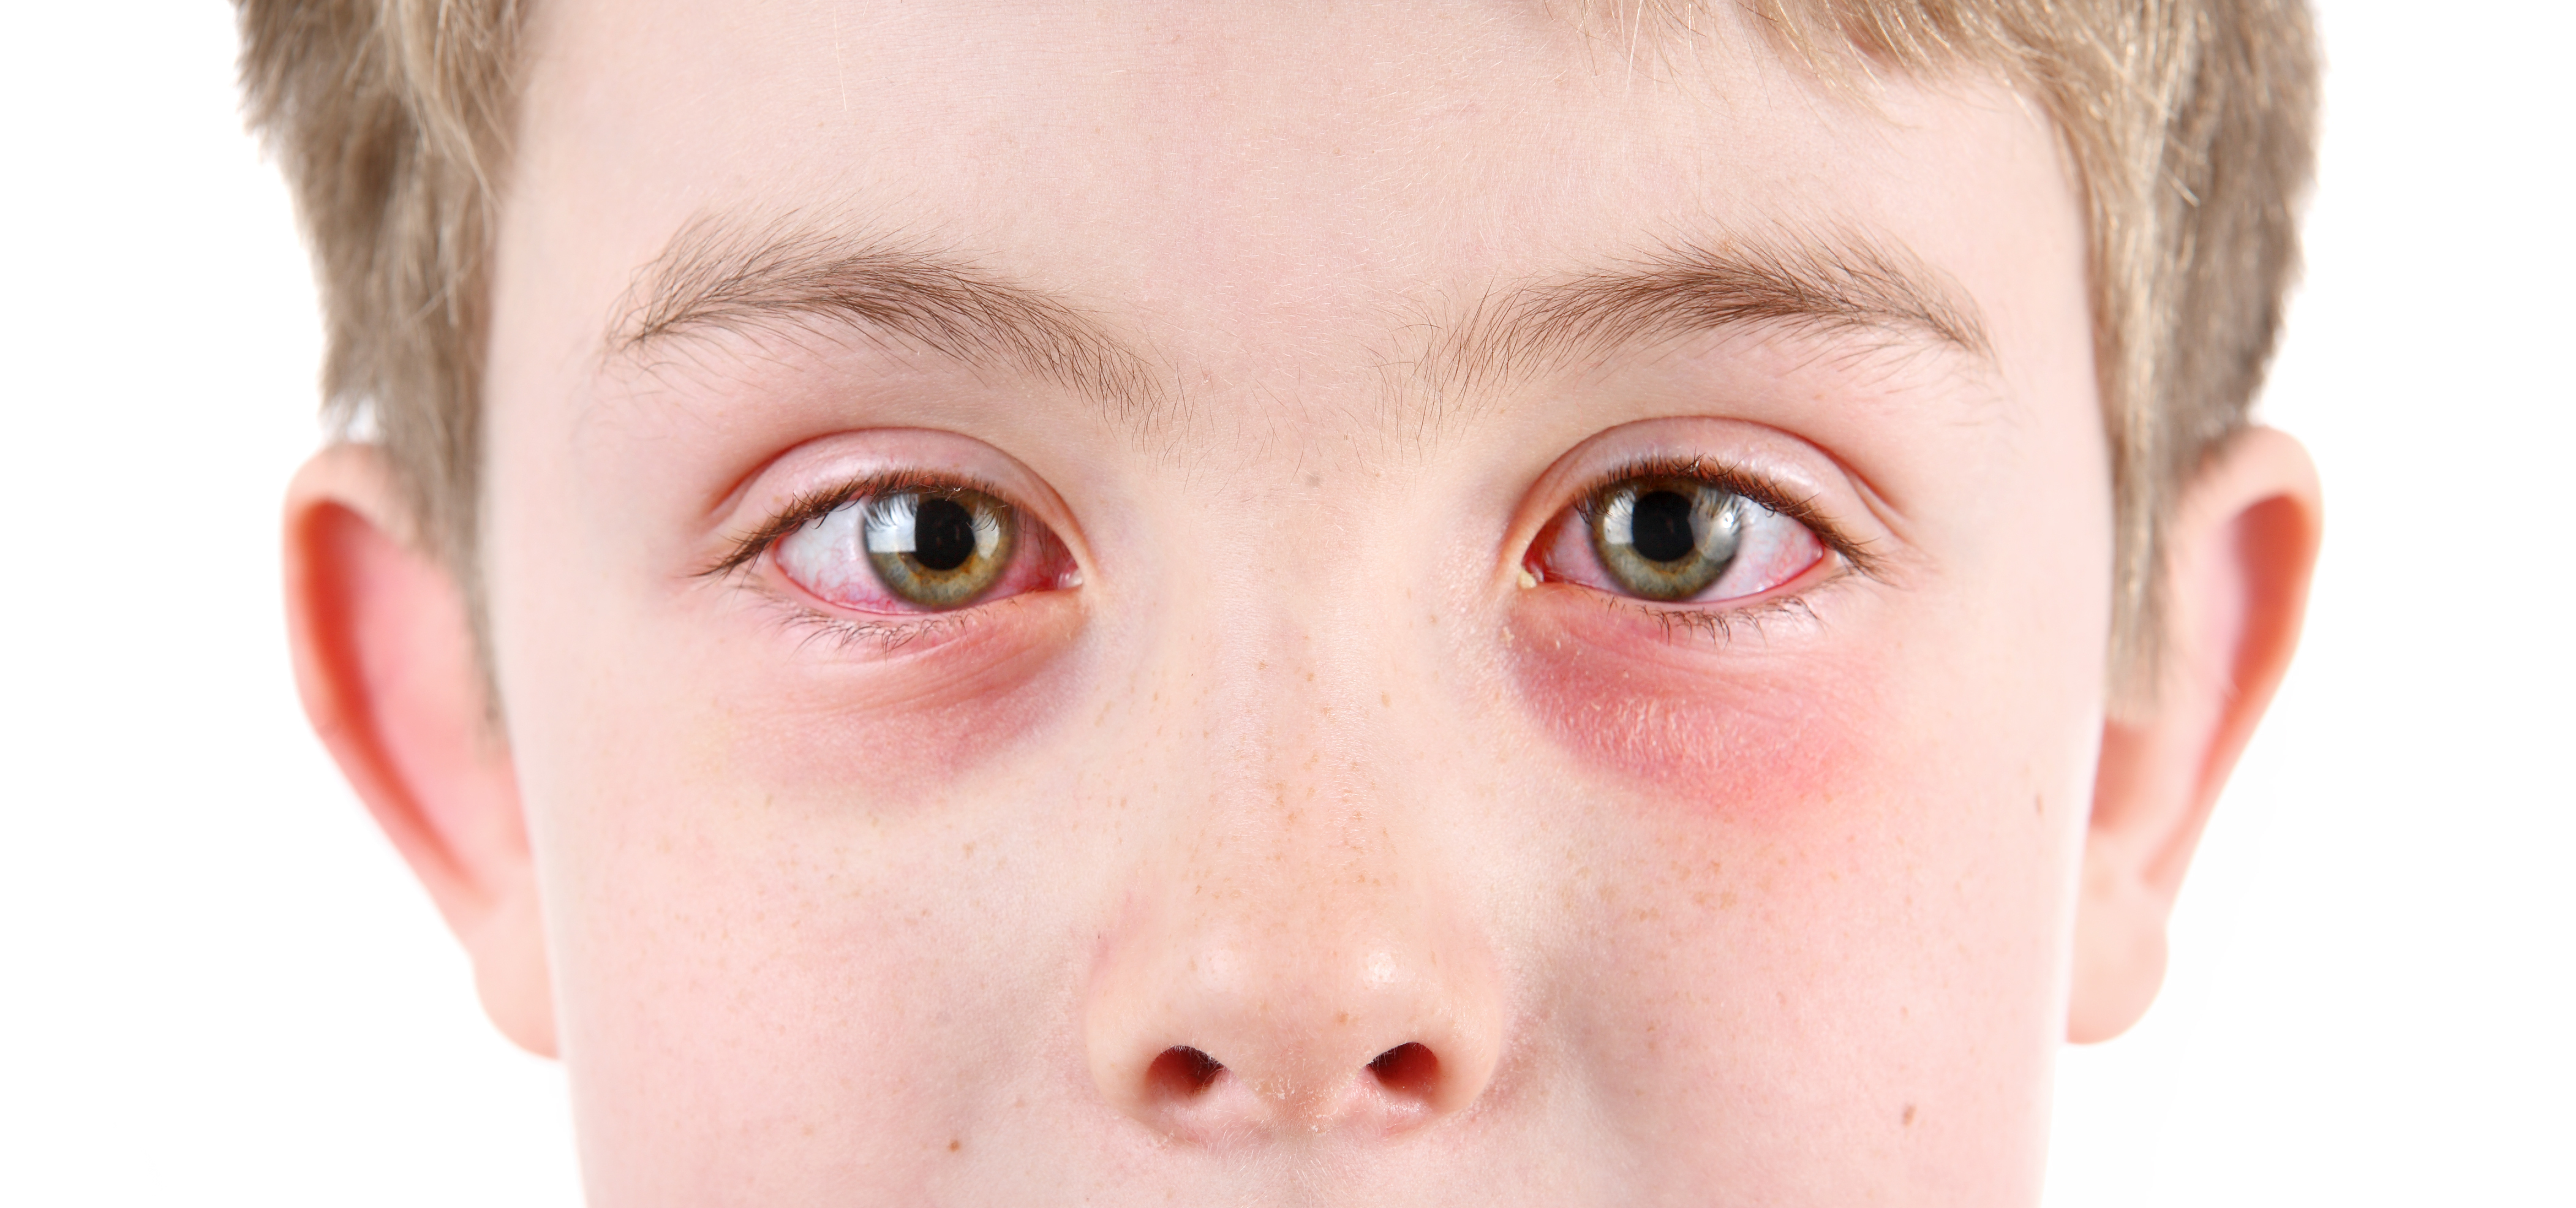 Tuesday Q and A: Eye infections common, especially in children - Mayo  Clinic News Network